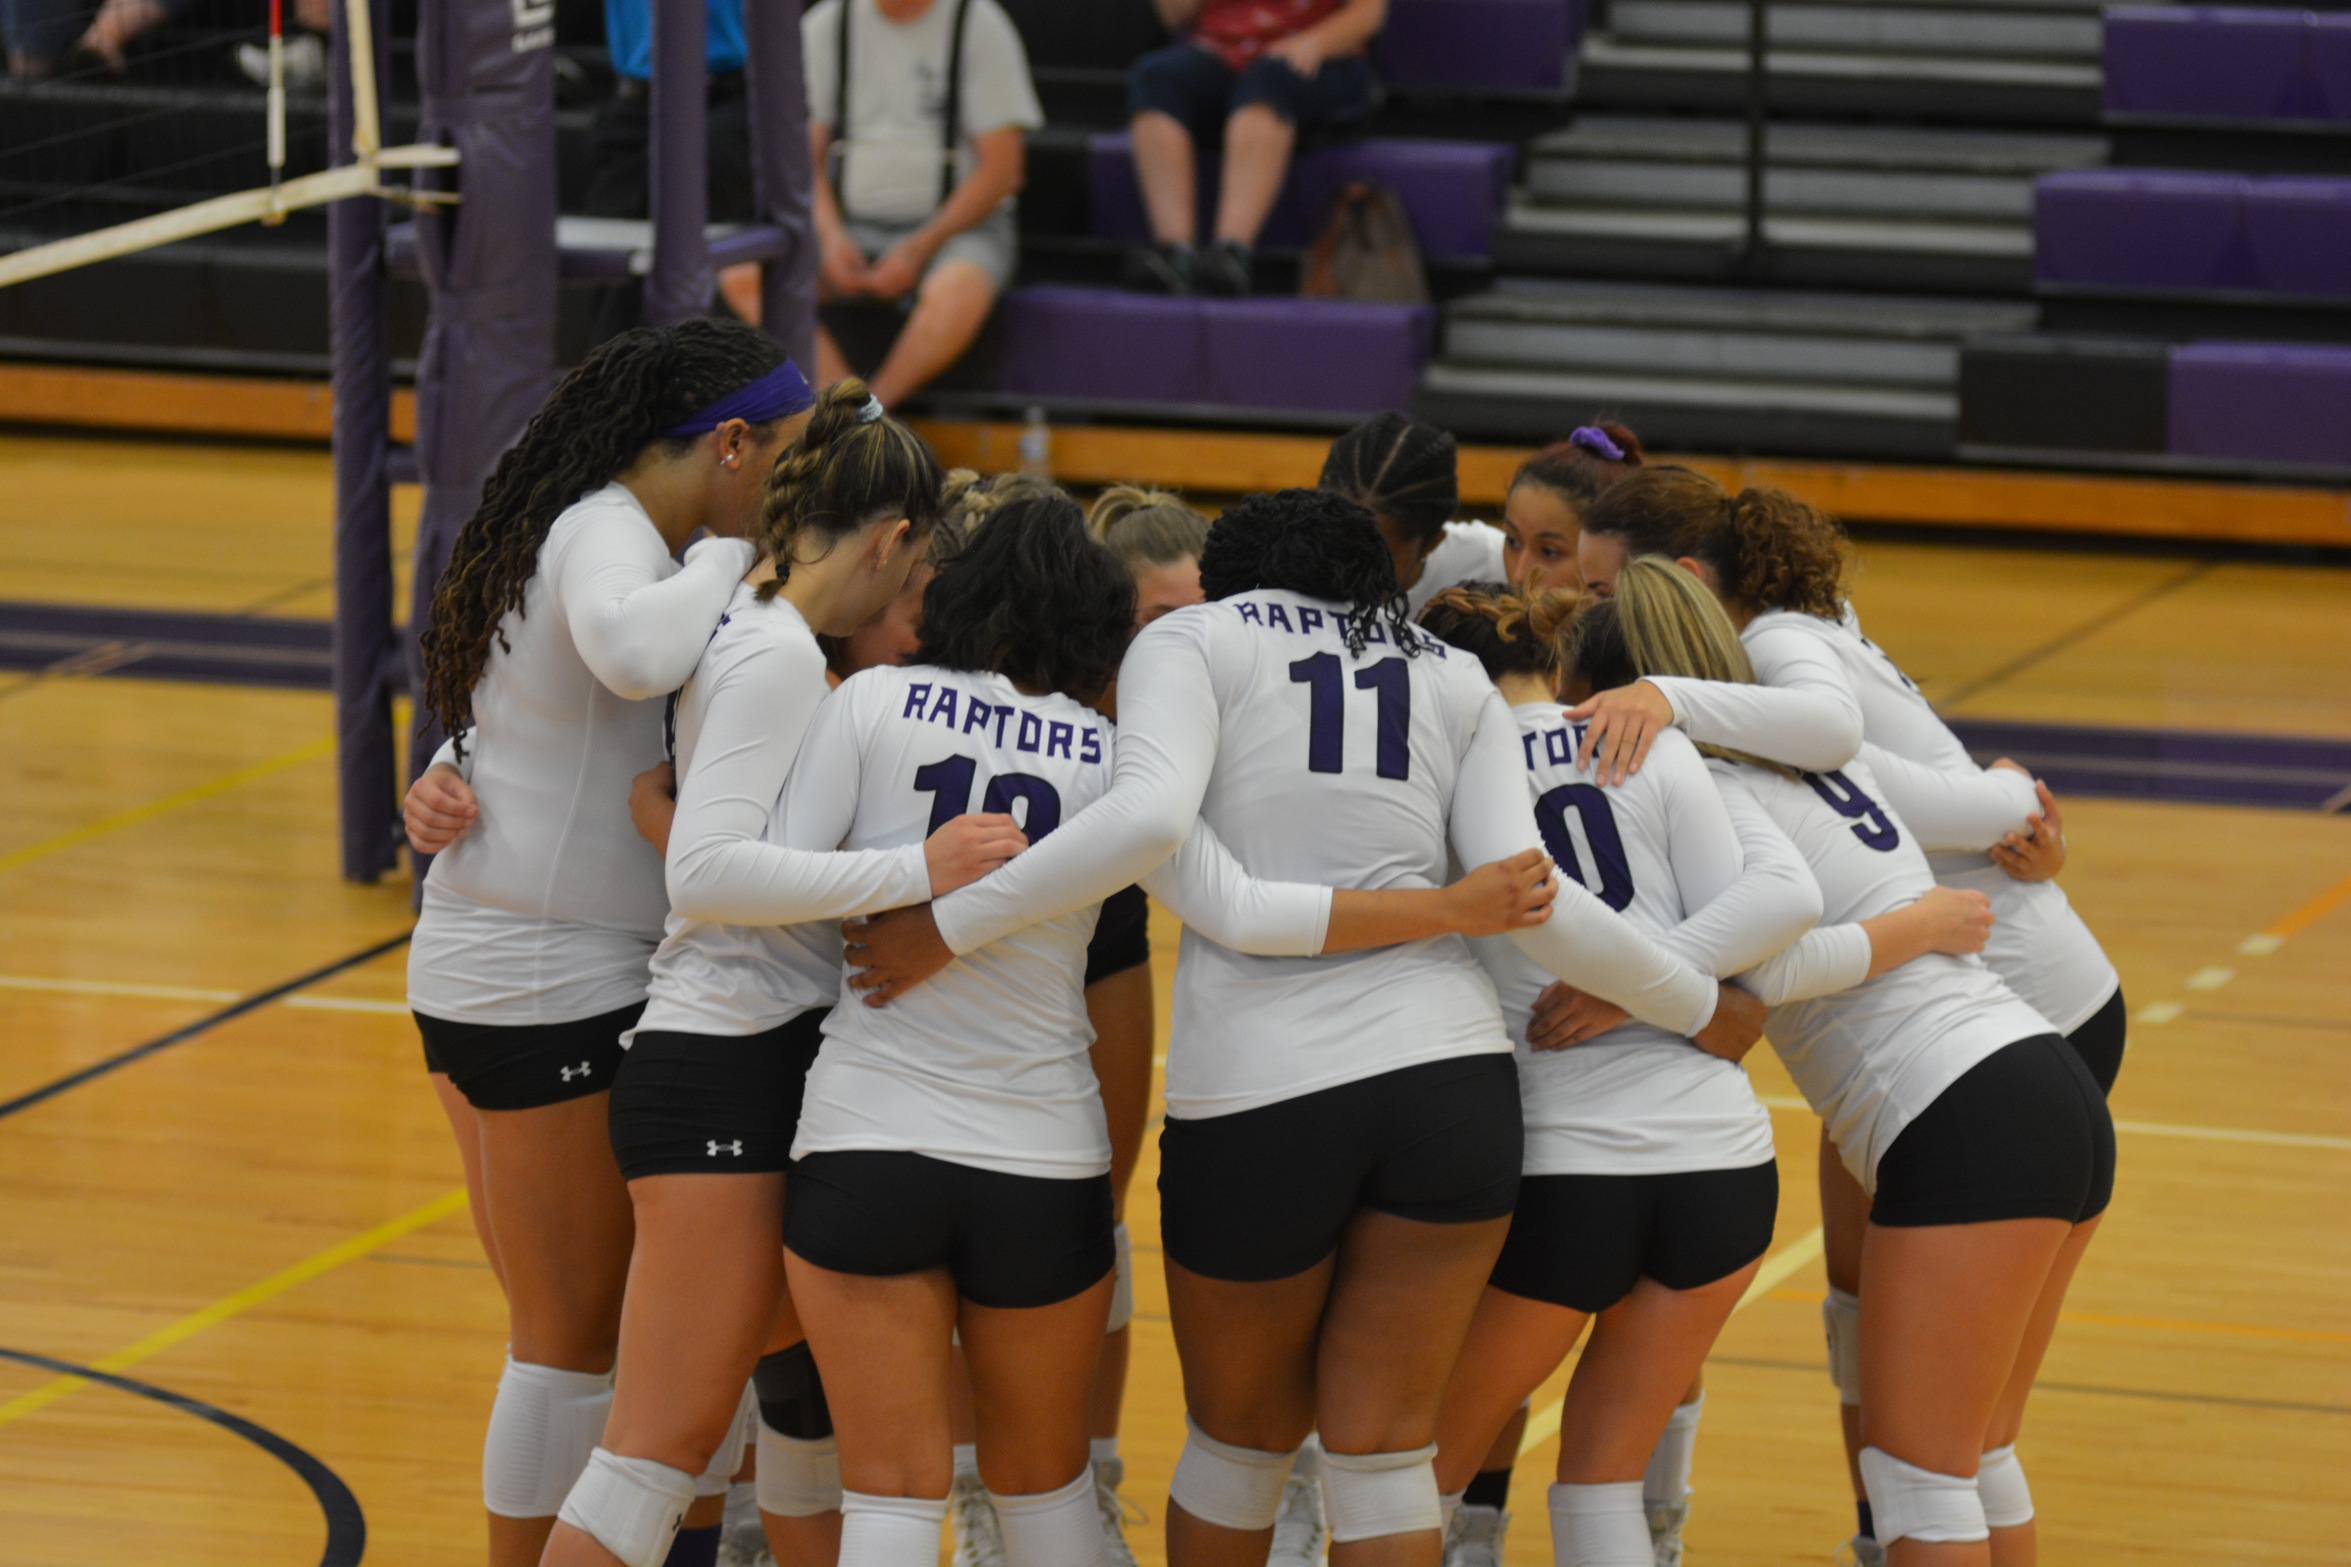 MC Volleyball takes 2 wins over the weekend.